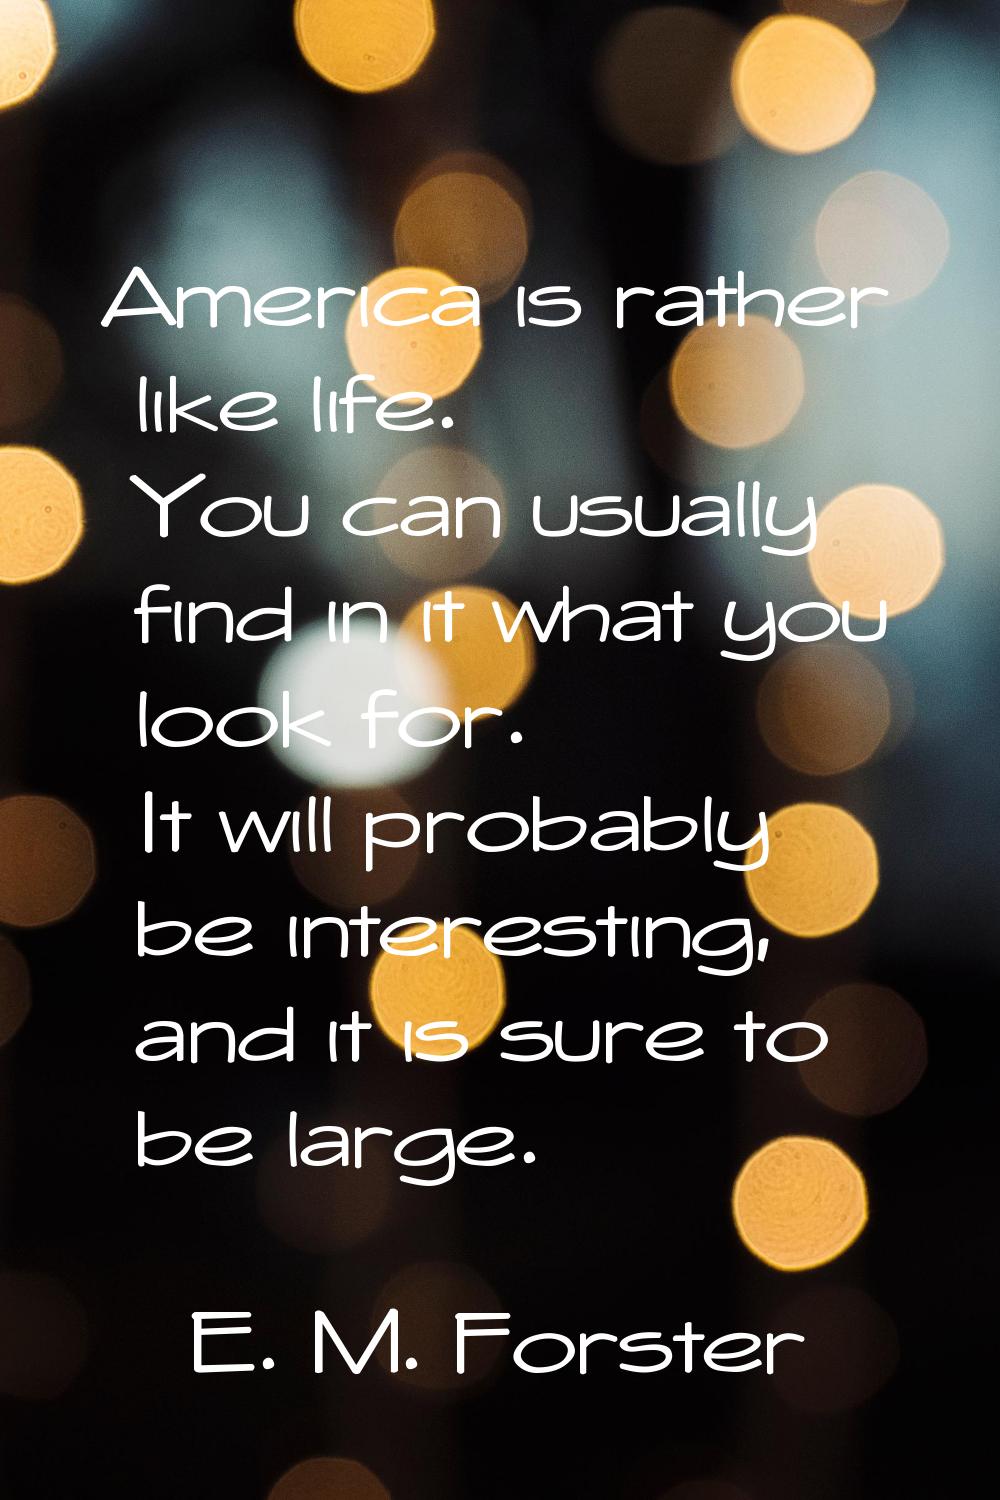 America is rather like life. You can usually find in it what you look for. It will probably be inte